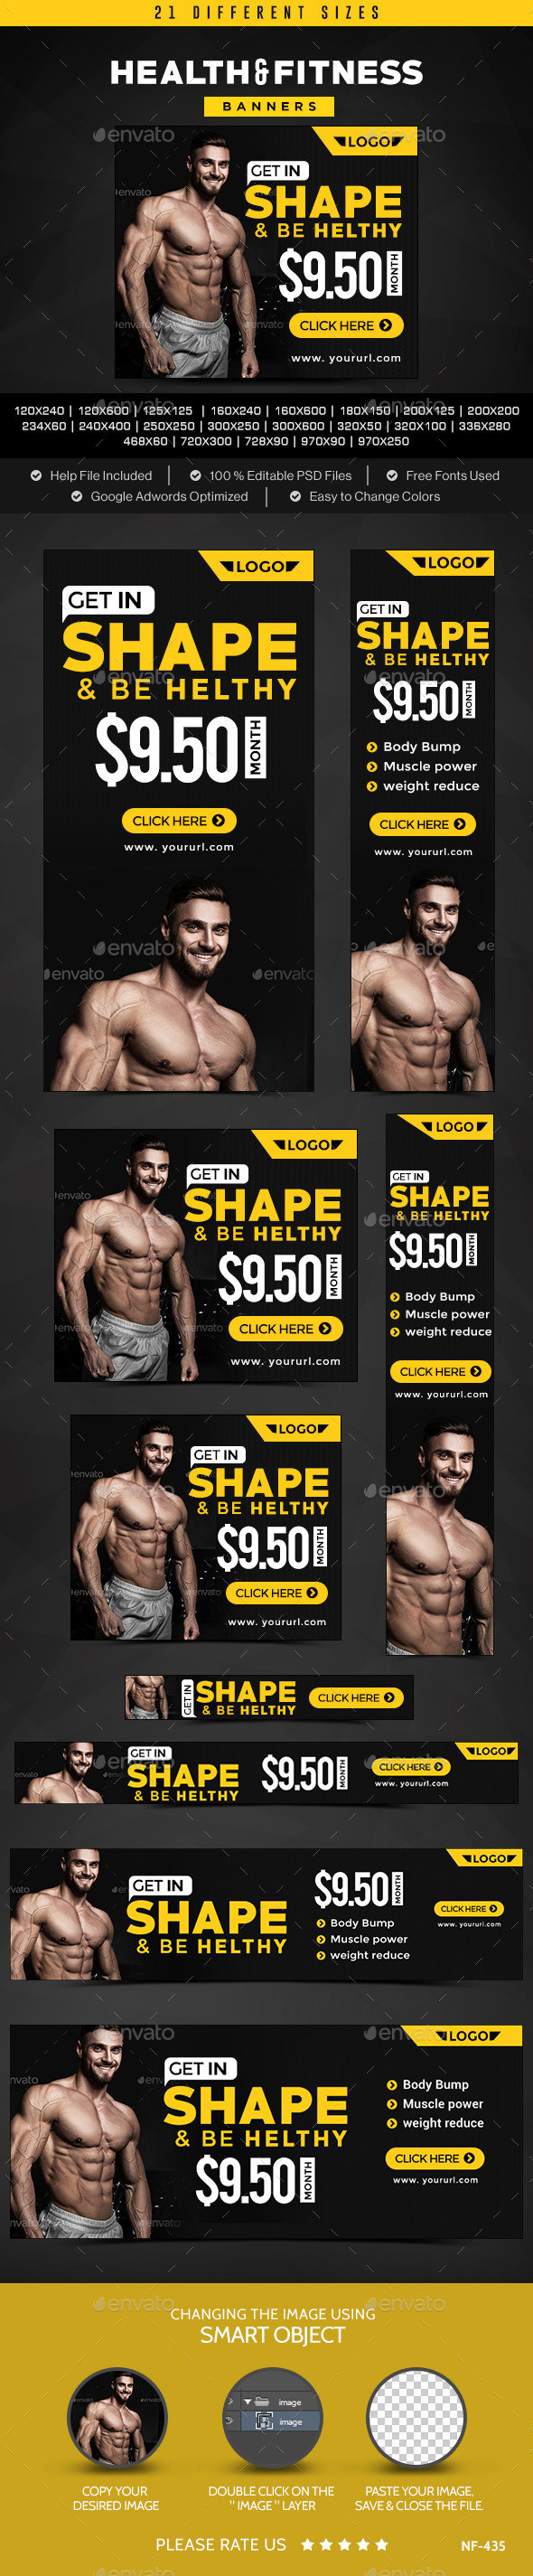 Nf 435 health fitness 20banners preview